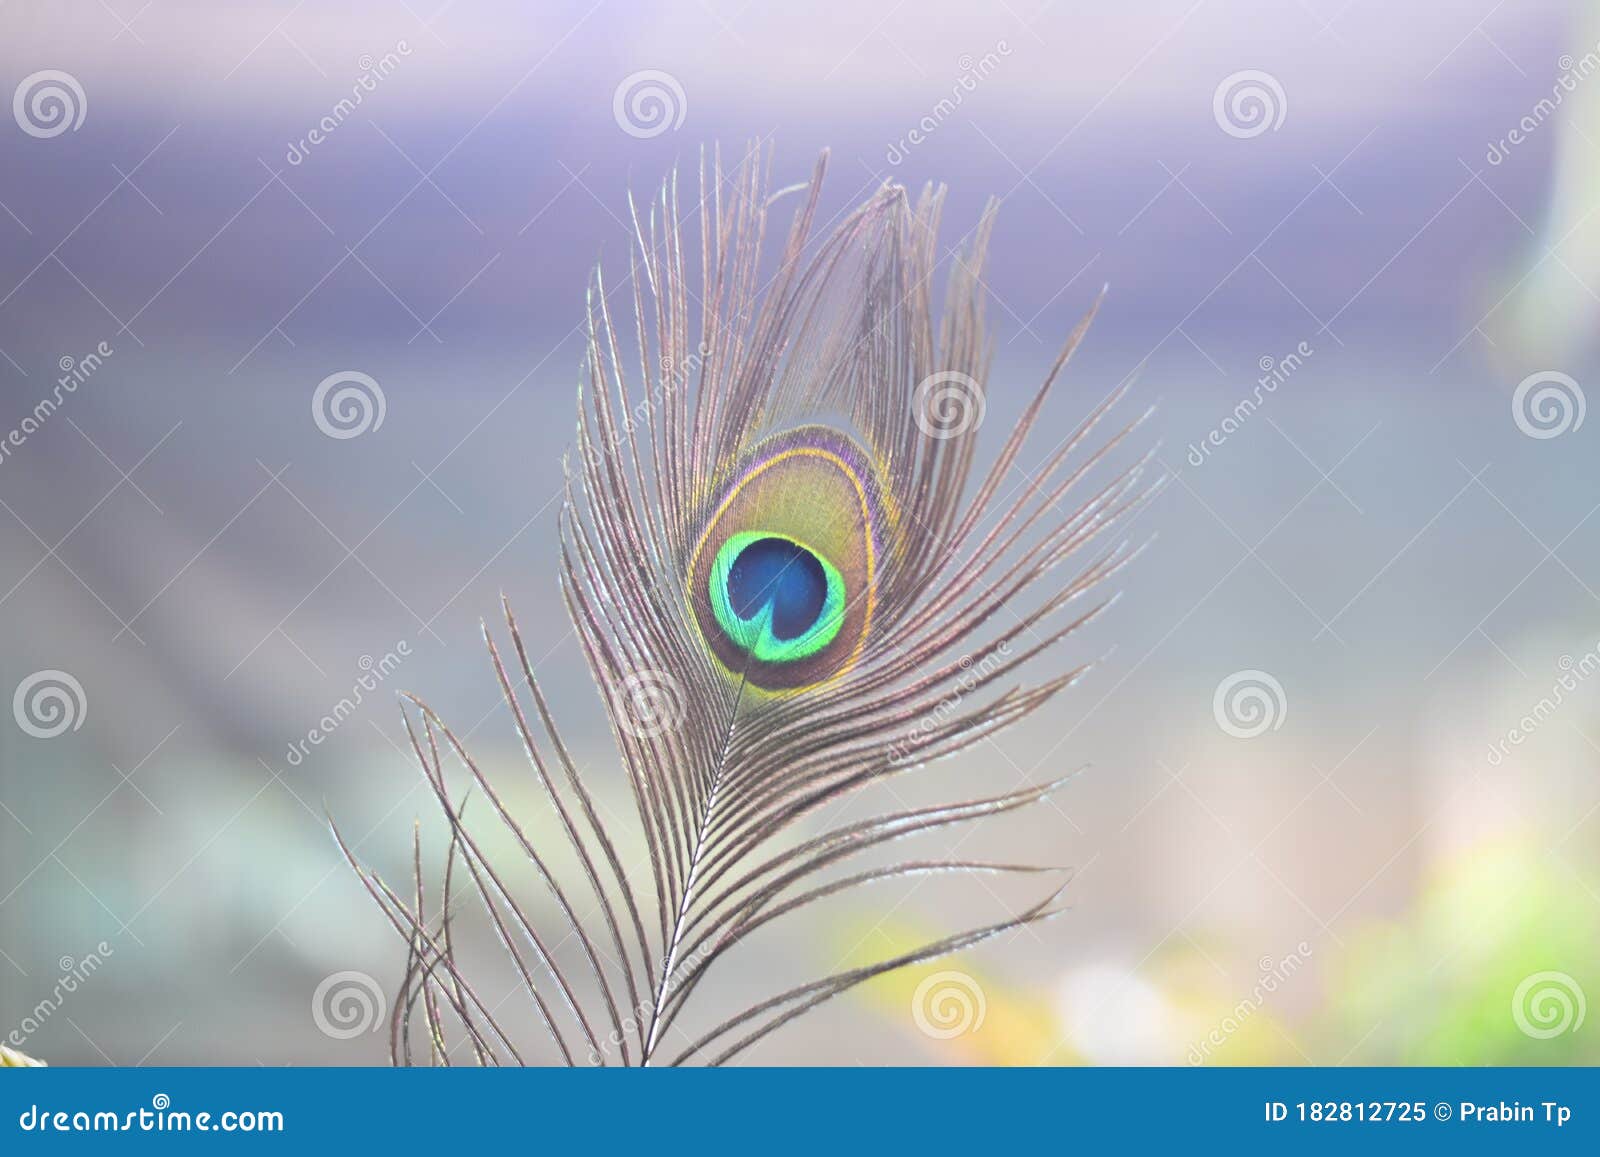 Peacock feather. stock image. Image of nature, blue - 182812725